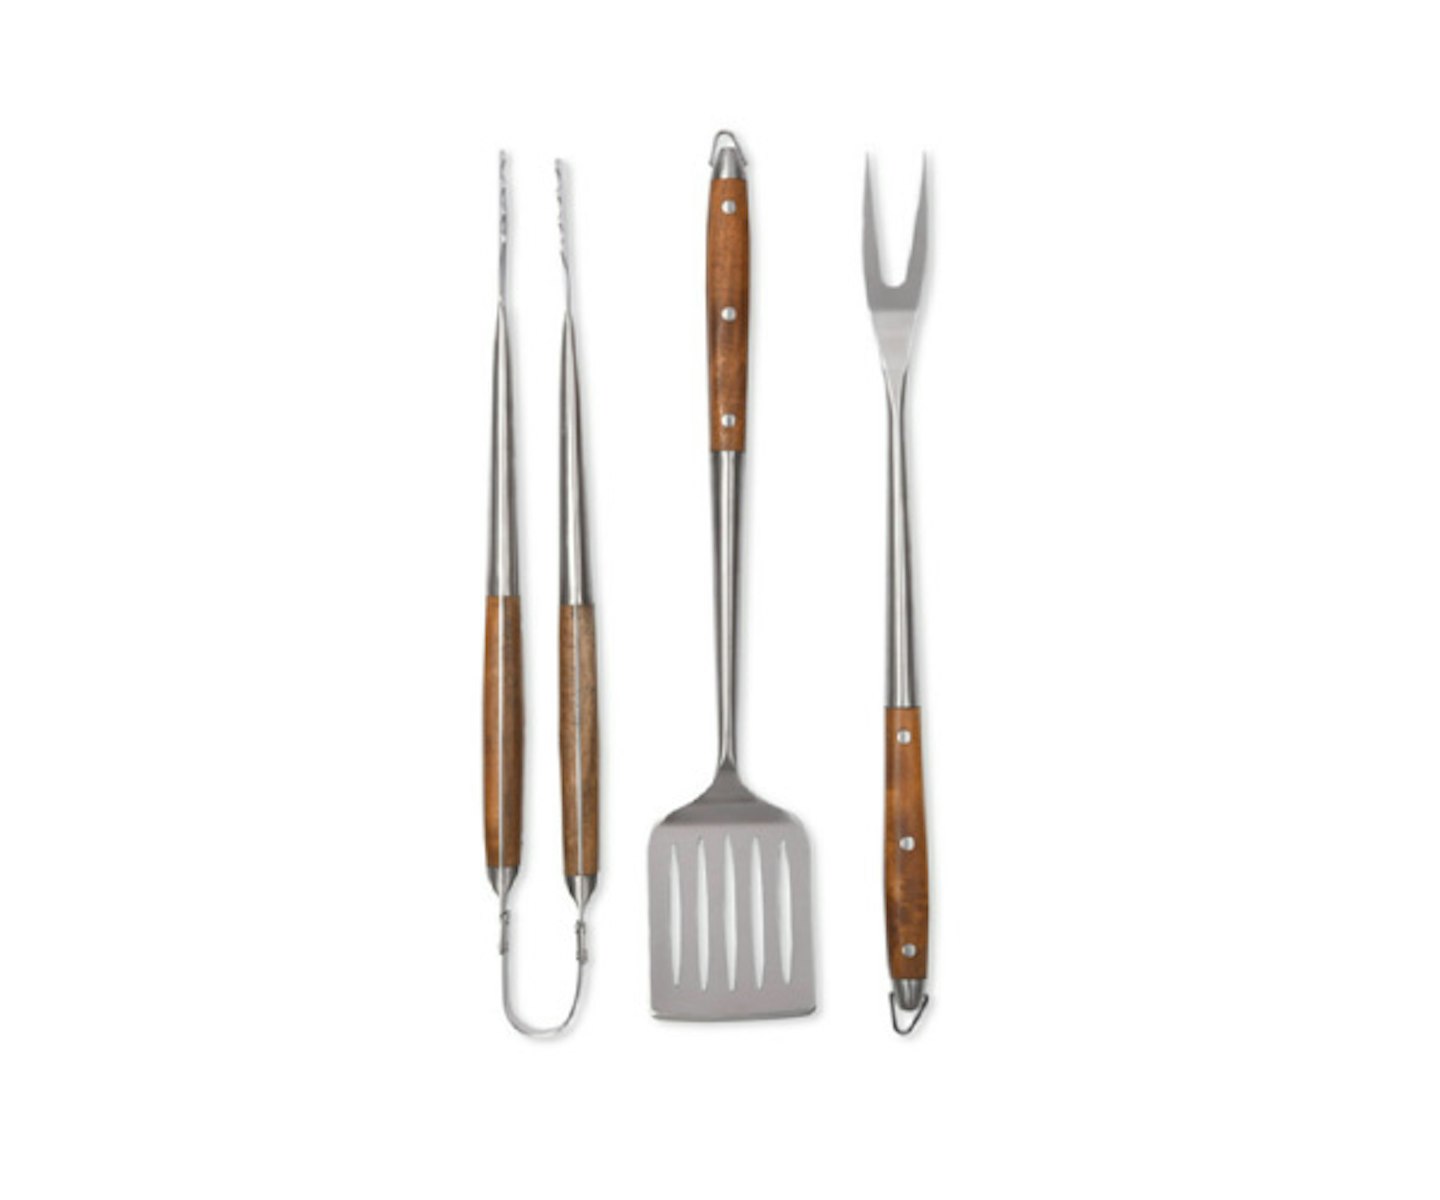 Turn, flip and serve up a feast at your garden barbecue with our stainless steel and acacia Set of 3 BBQ Tools.